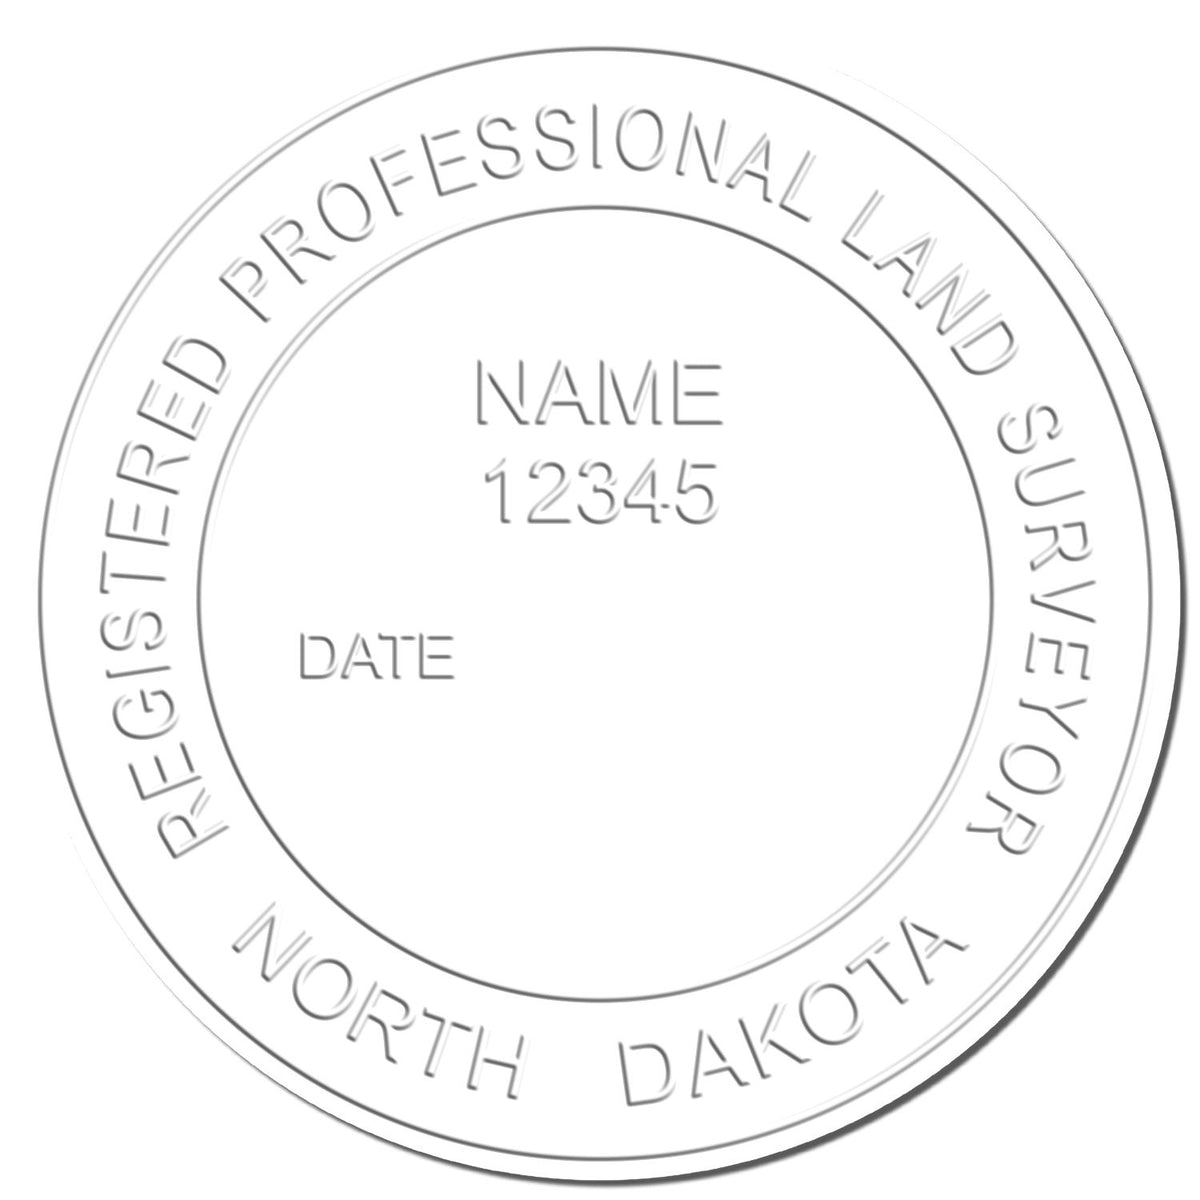 This paper is stamped with a sample imprint of the Gift North Dakota Land Surveyor Seal, signifying its quality and reliability.